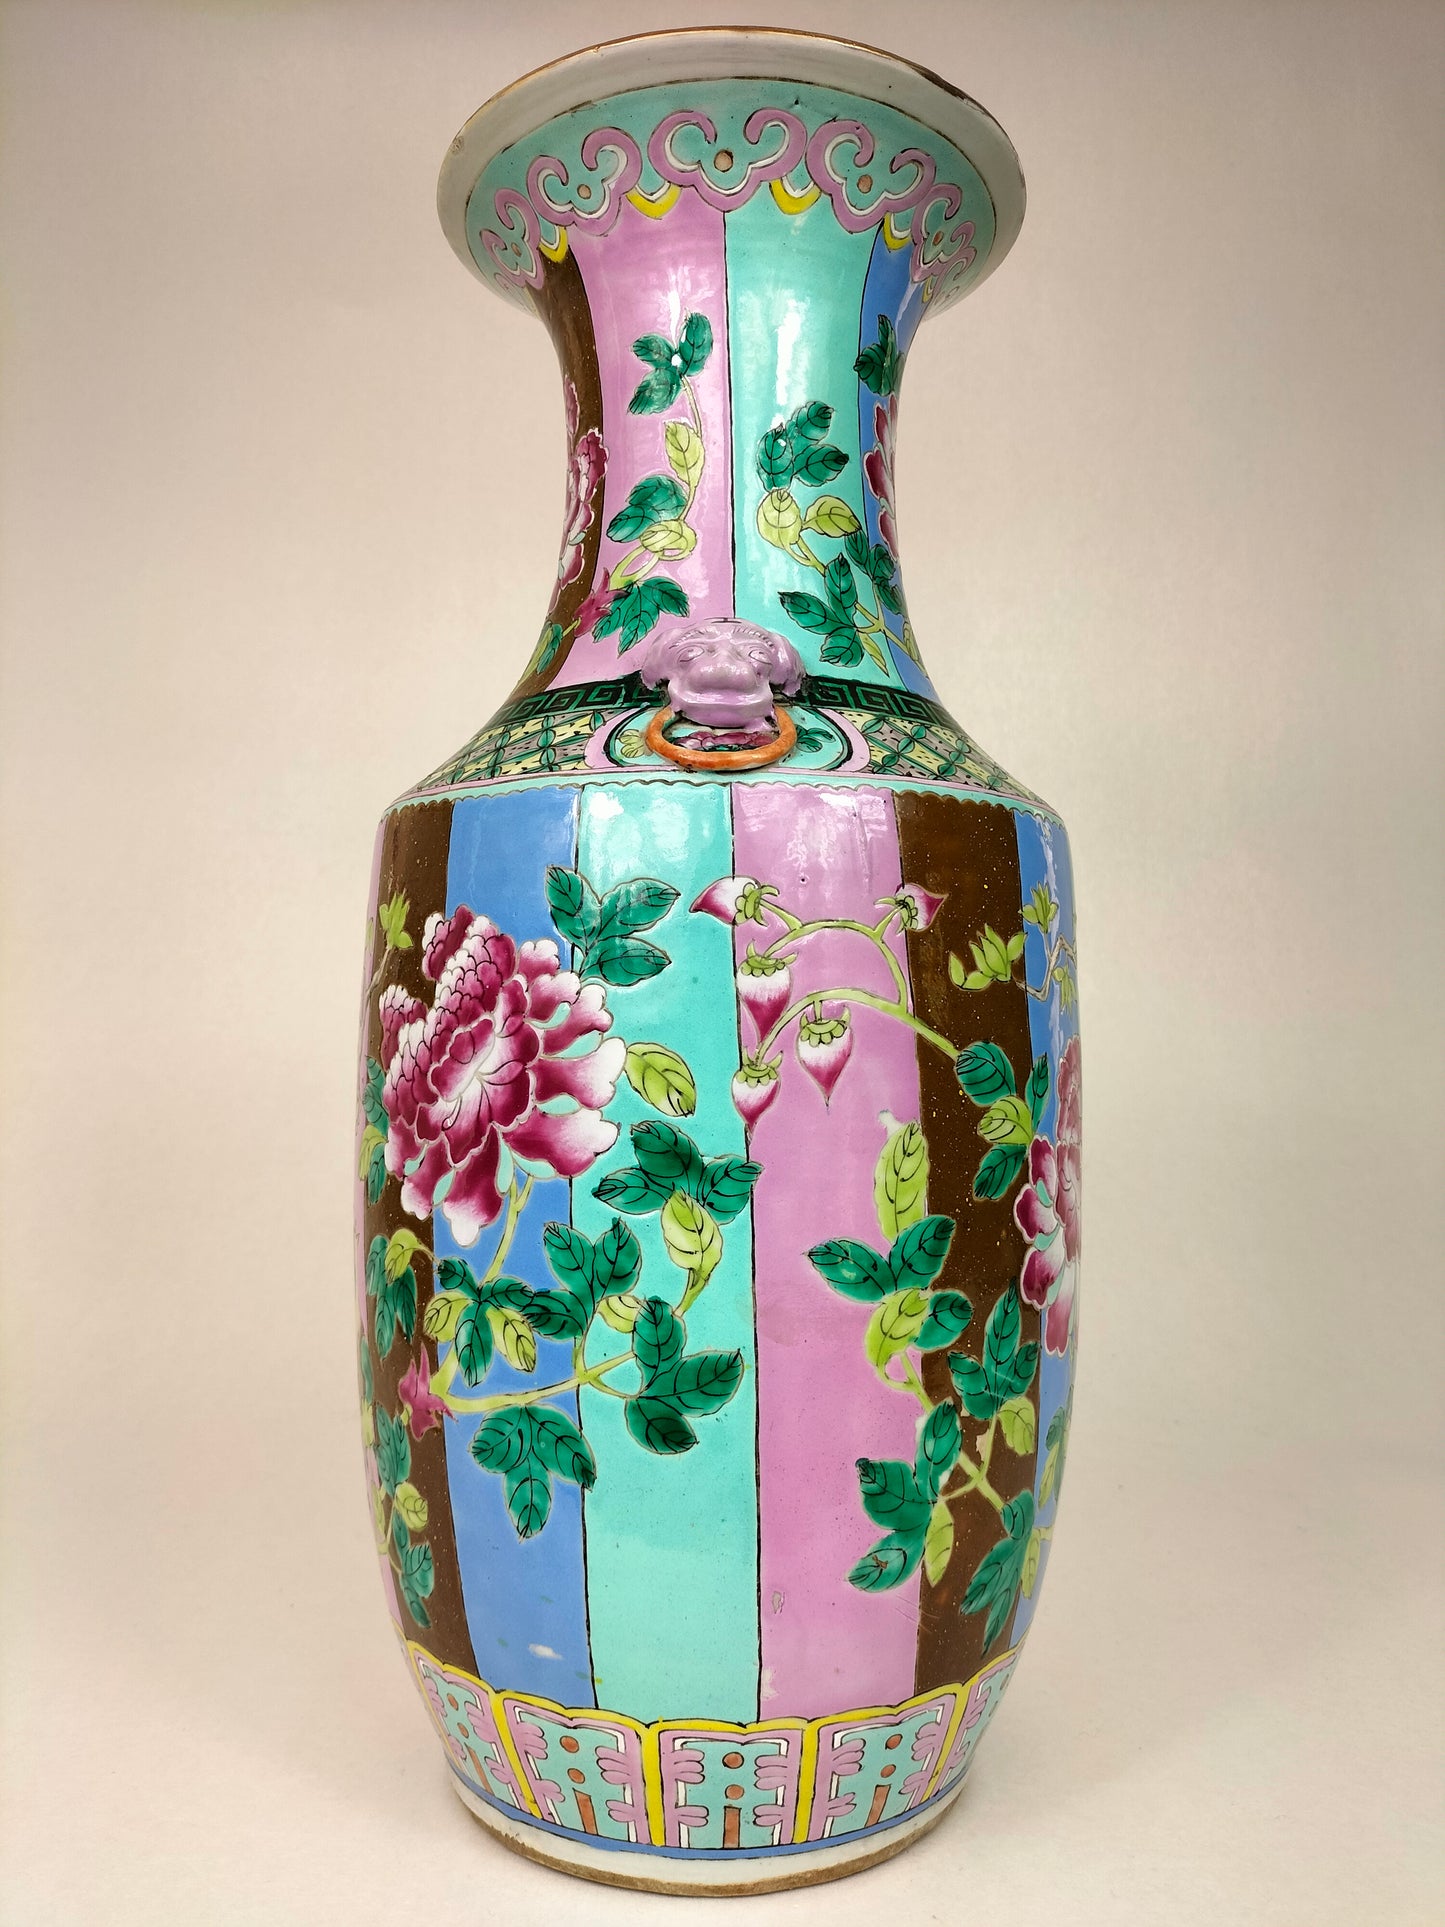 Antique Chinese famille rose vase with foo dog handles and a decoration of flowers // Qing Dynasty - 19th century